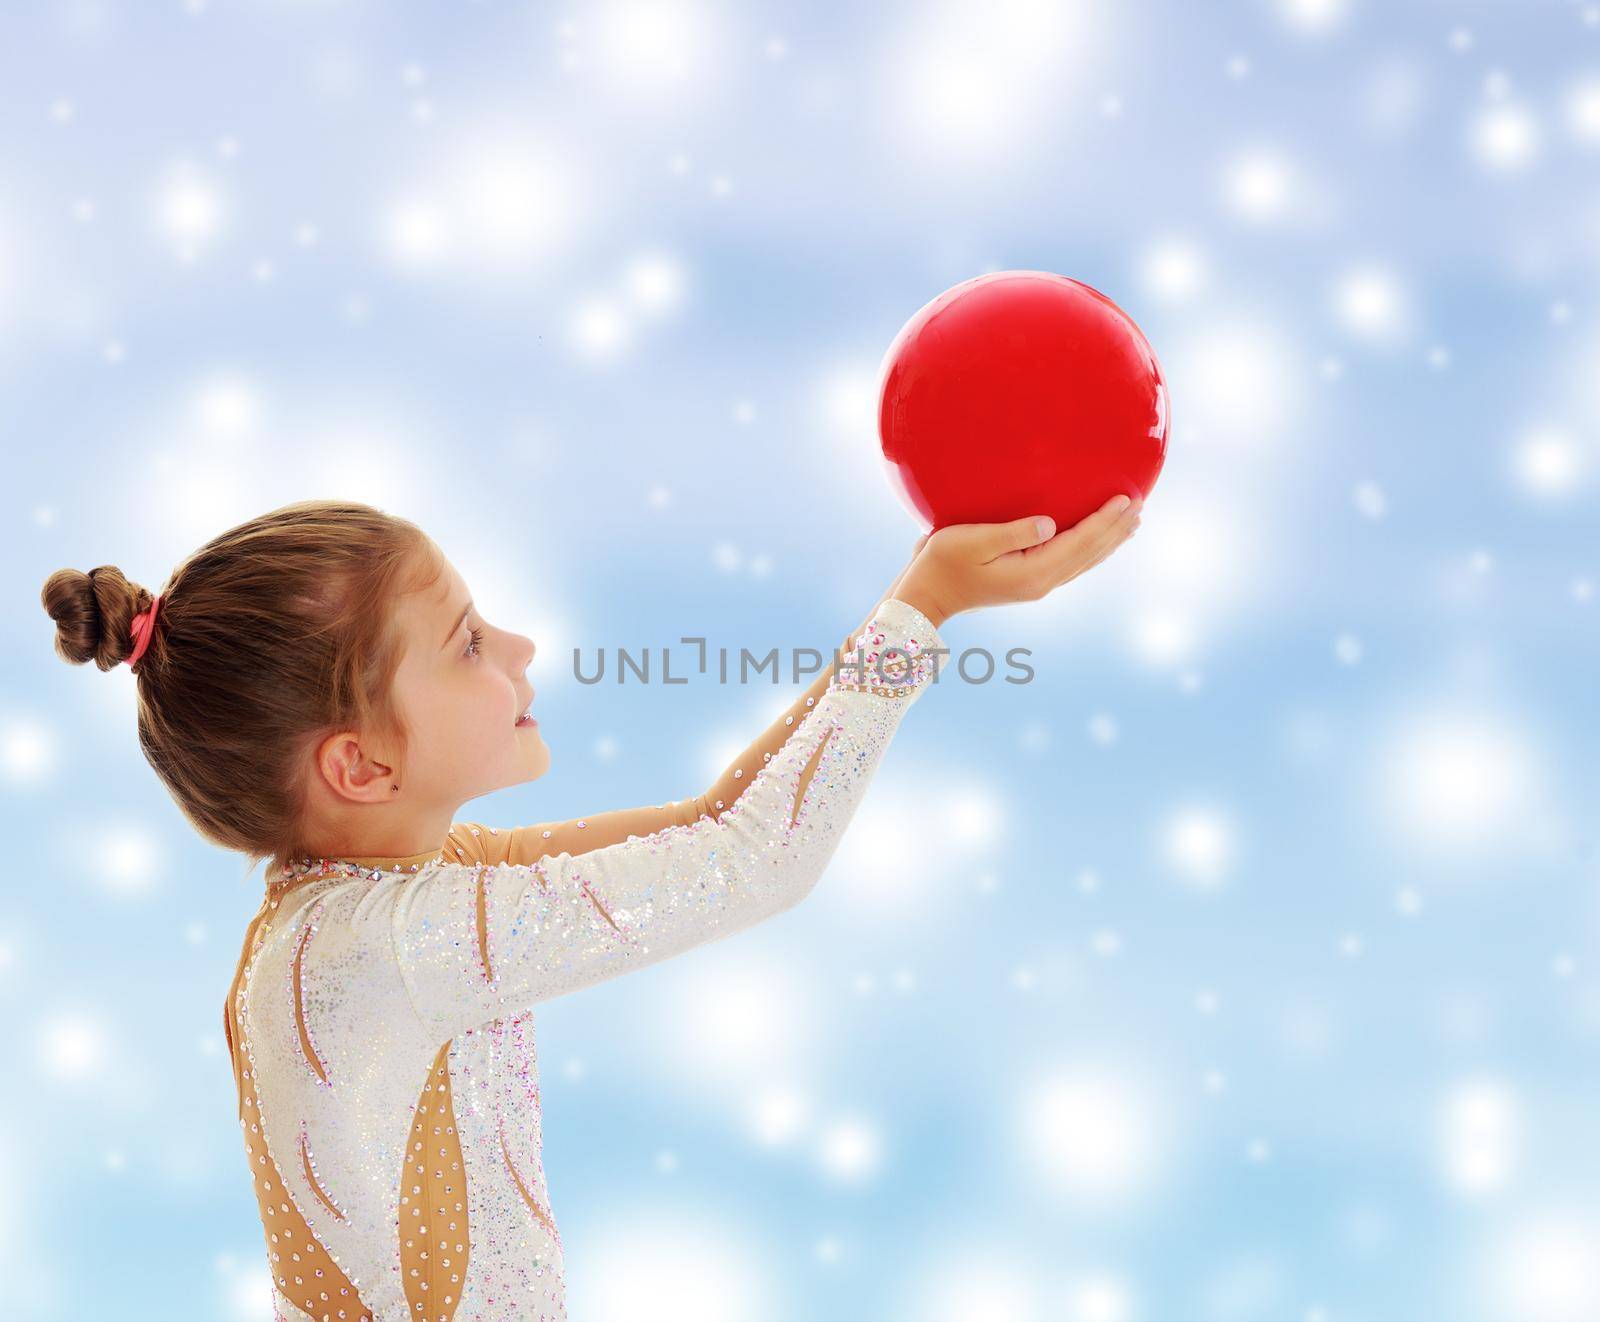 Cute little girl gymnast turned sideways to the camera , holding in his outstretched hands a red ball.On a blue background with large, white, Christmas or new year's snowflakes.